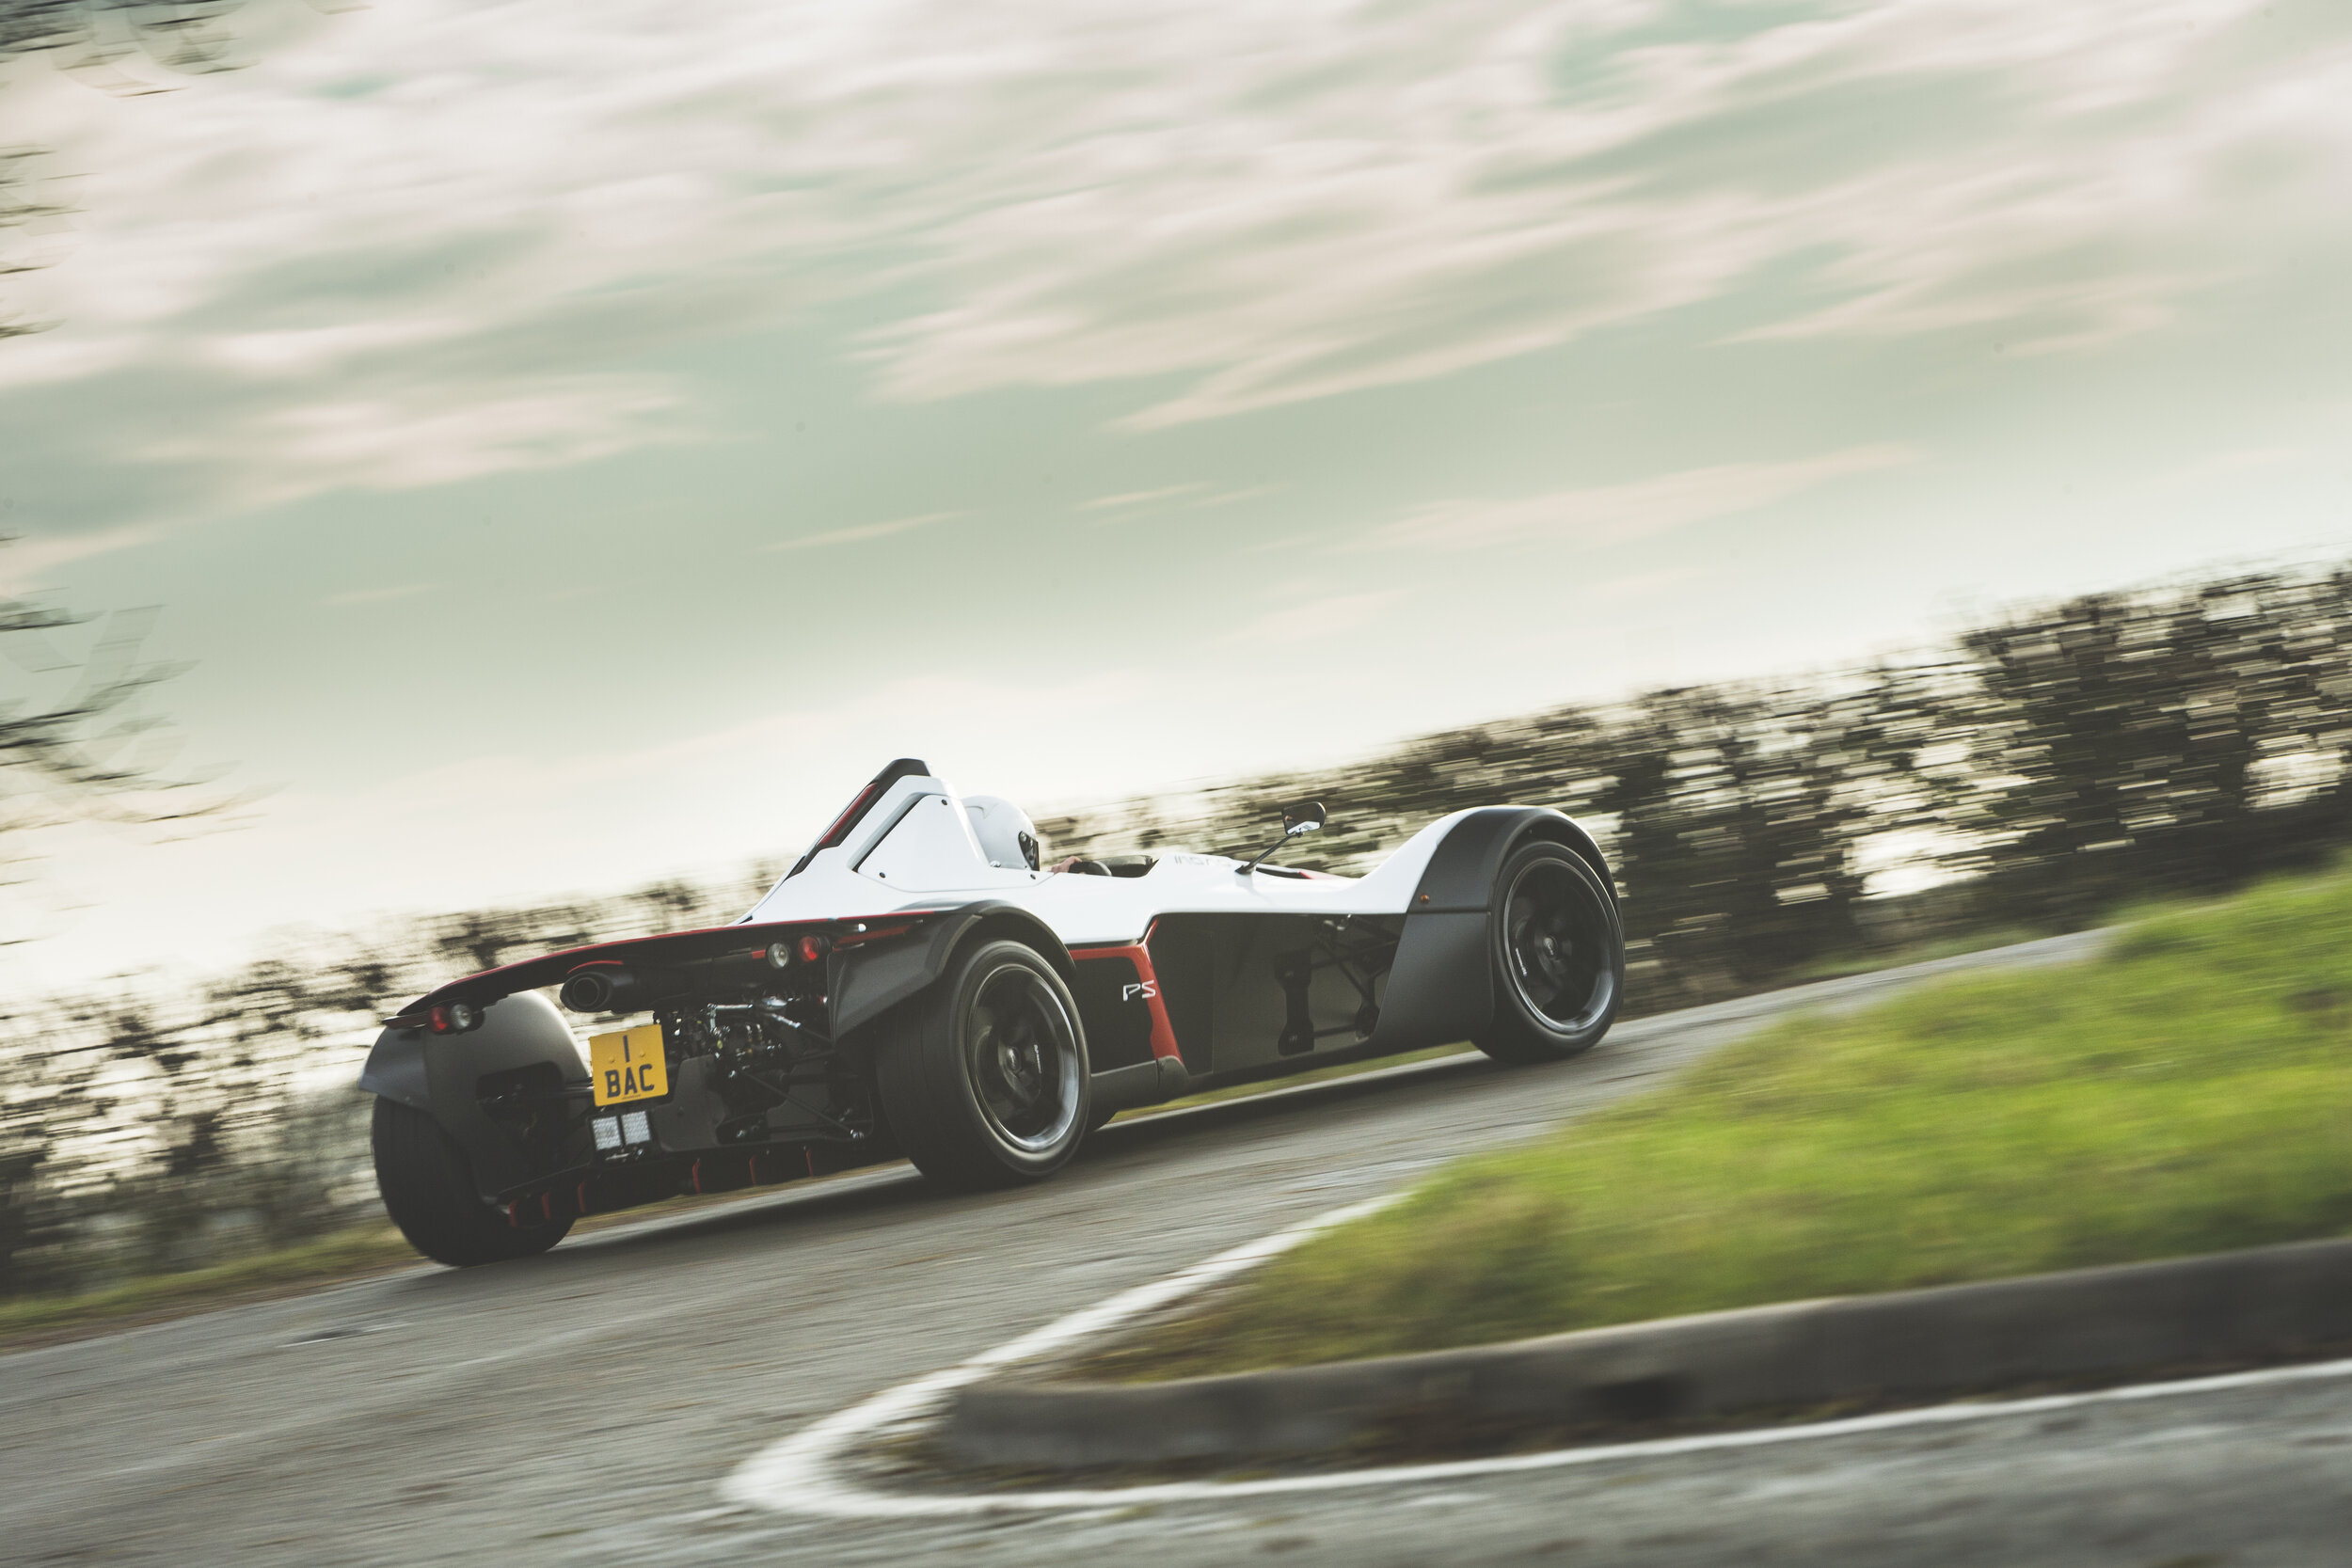 BAC Mono Returns To Autobahn For Another Roofless Top-Speed Run